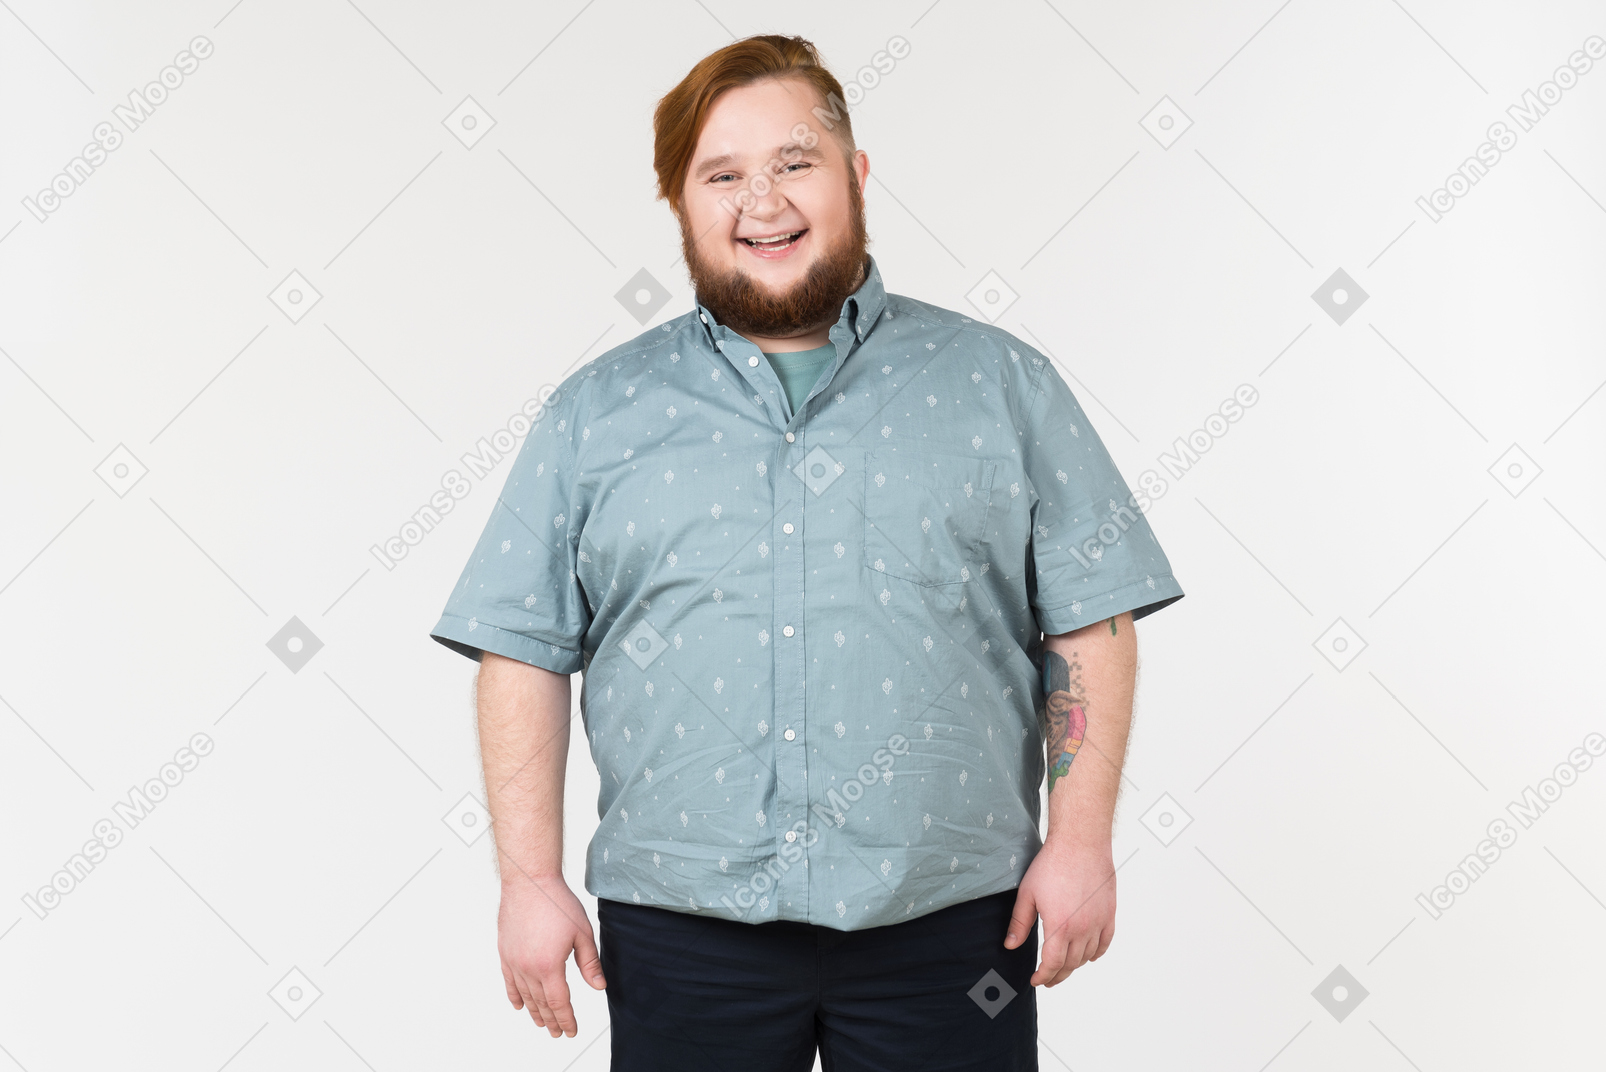 A fat man standing and smiling widely